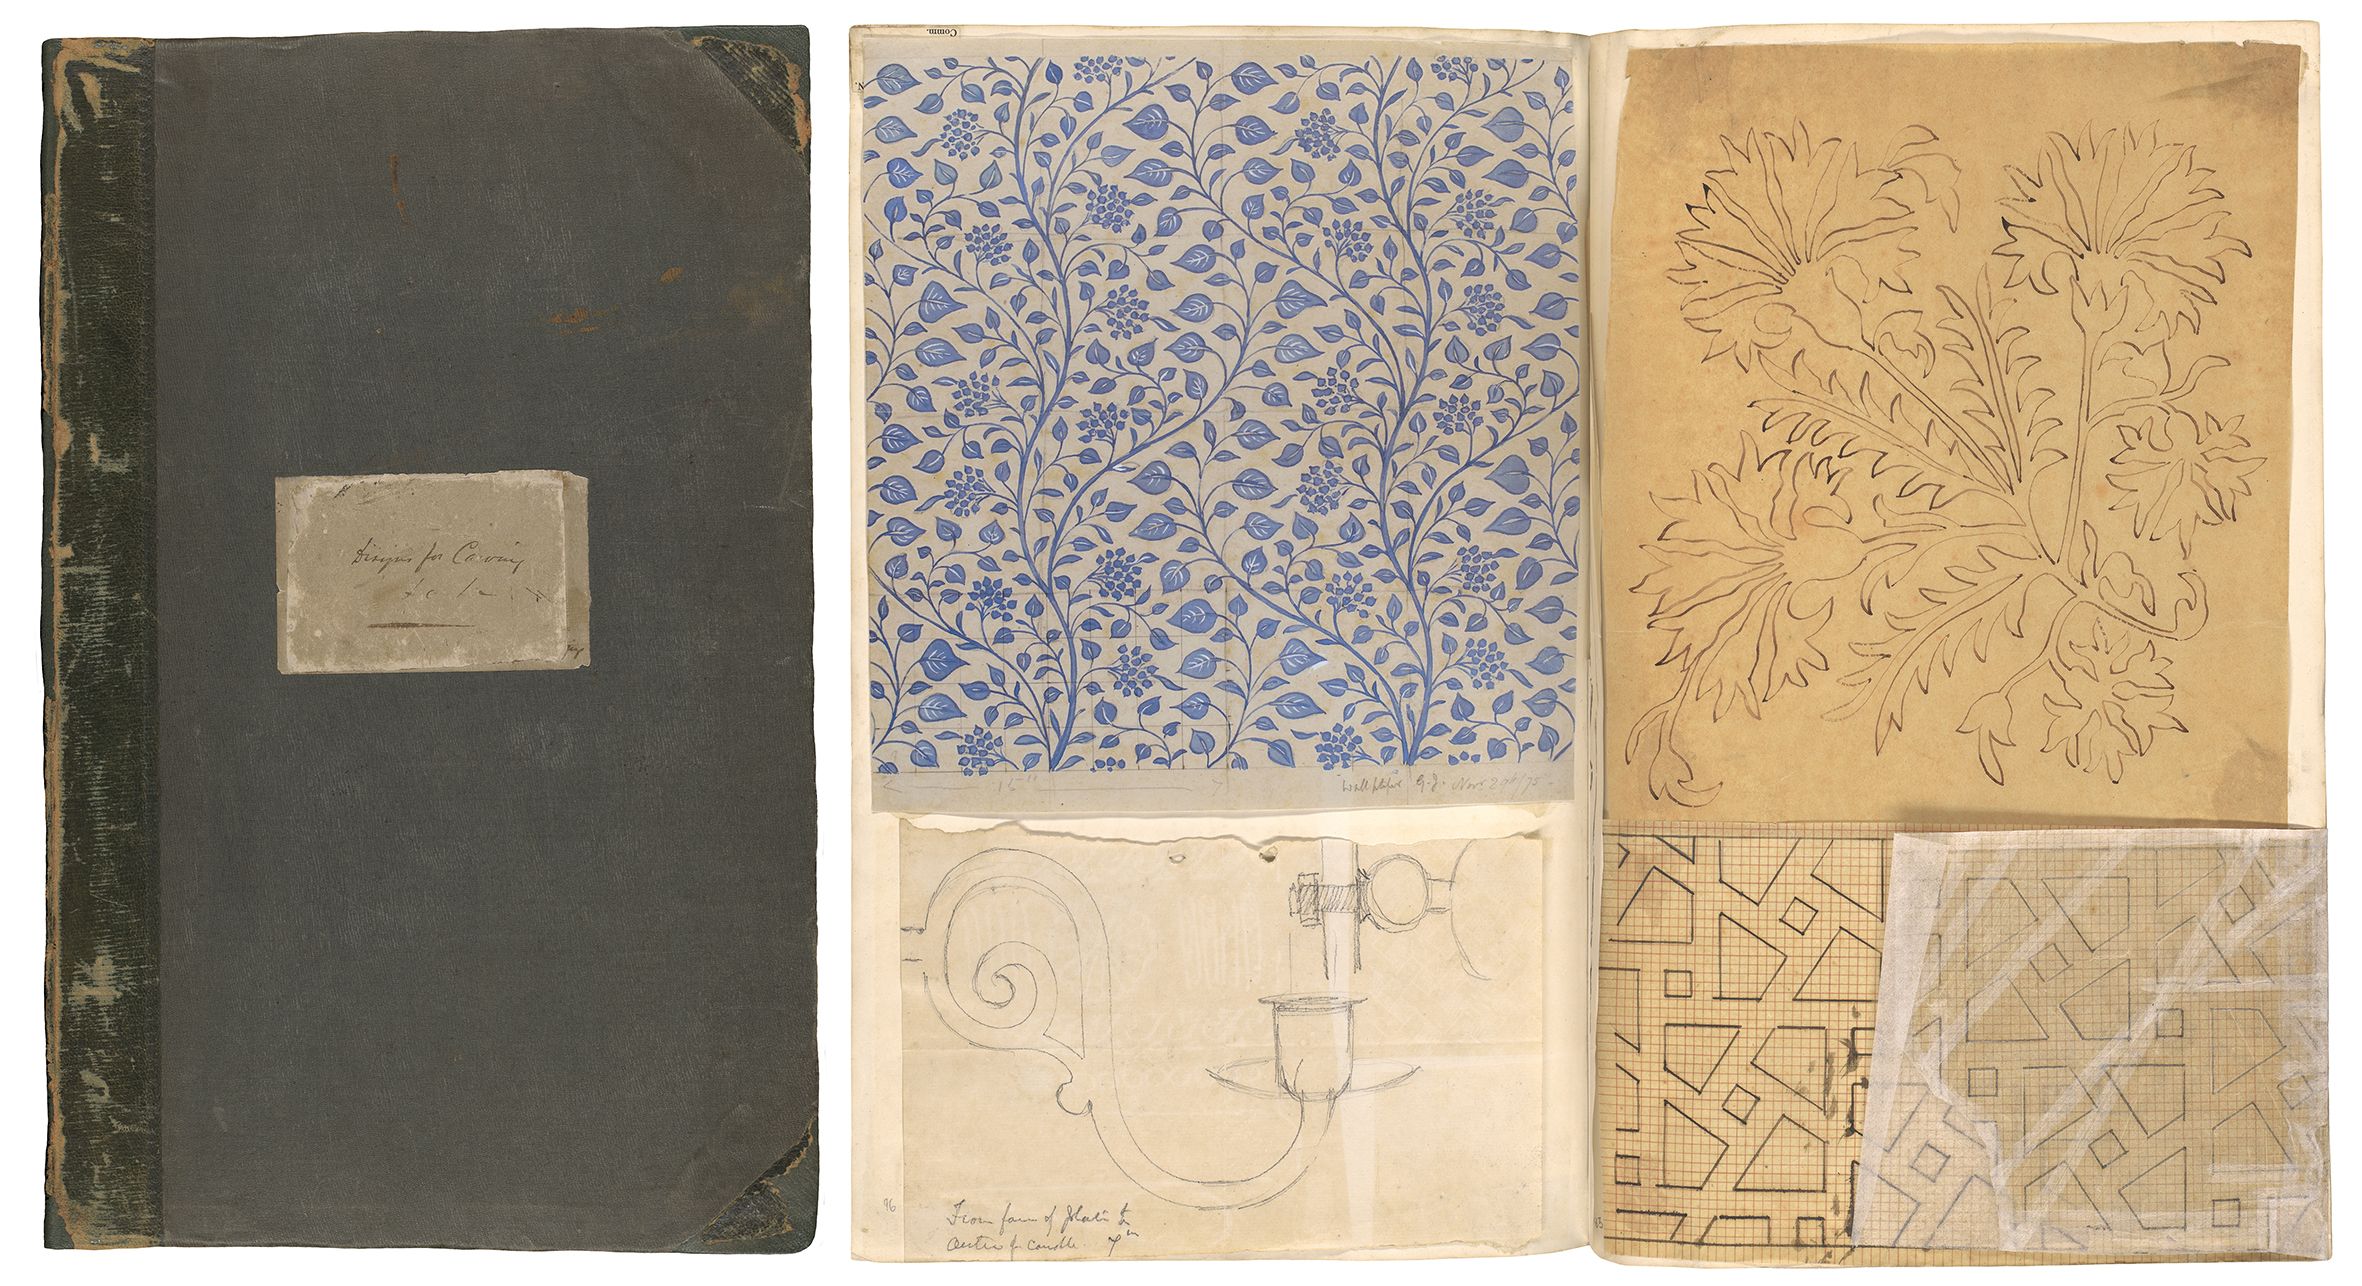 Gertrude Jekyll 'Designs for Carving' scrap book (1866 - 1911) from the RHS Lindley Collections. 